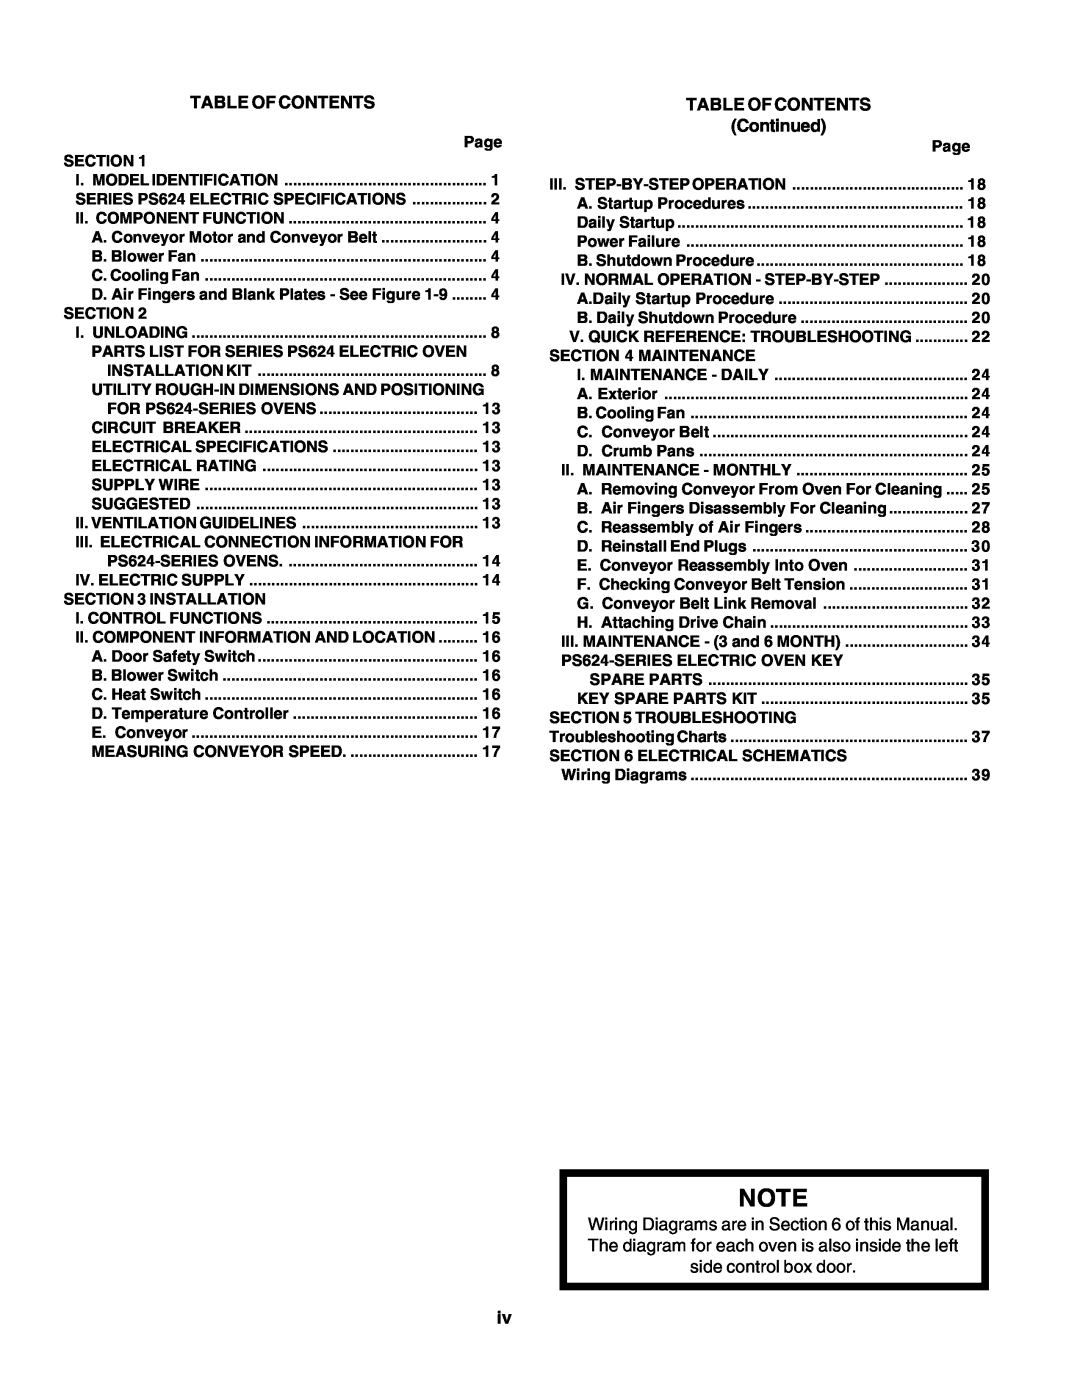 Middleby Marshall PS624E installation manual Table Of Contents, Continued 